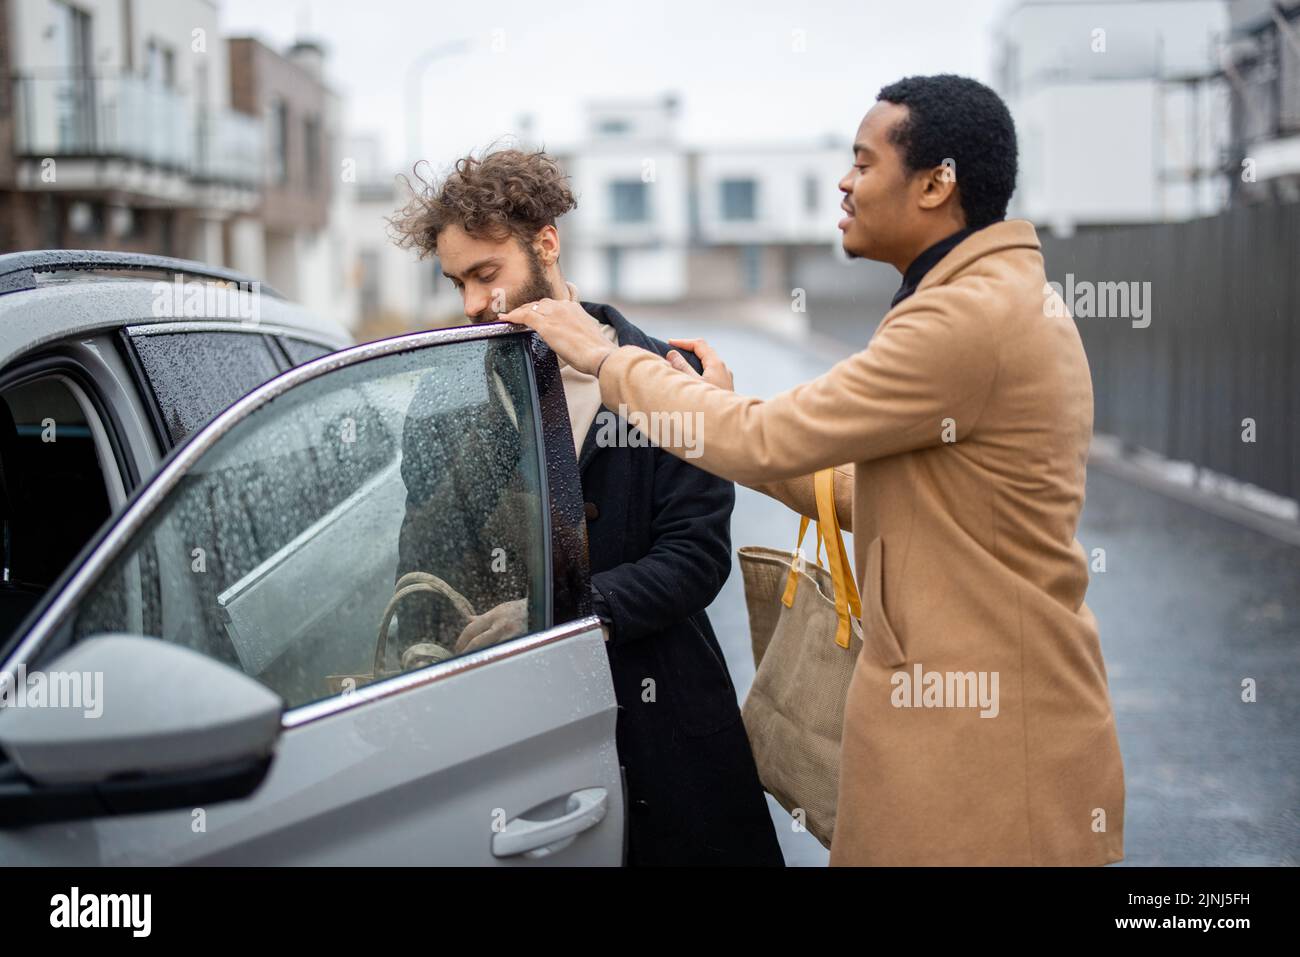 Two men flirting or having a close conversation while opening car door on the street. Concept of homosexual relations or close male friendship. Caucas Stock Photo